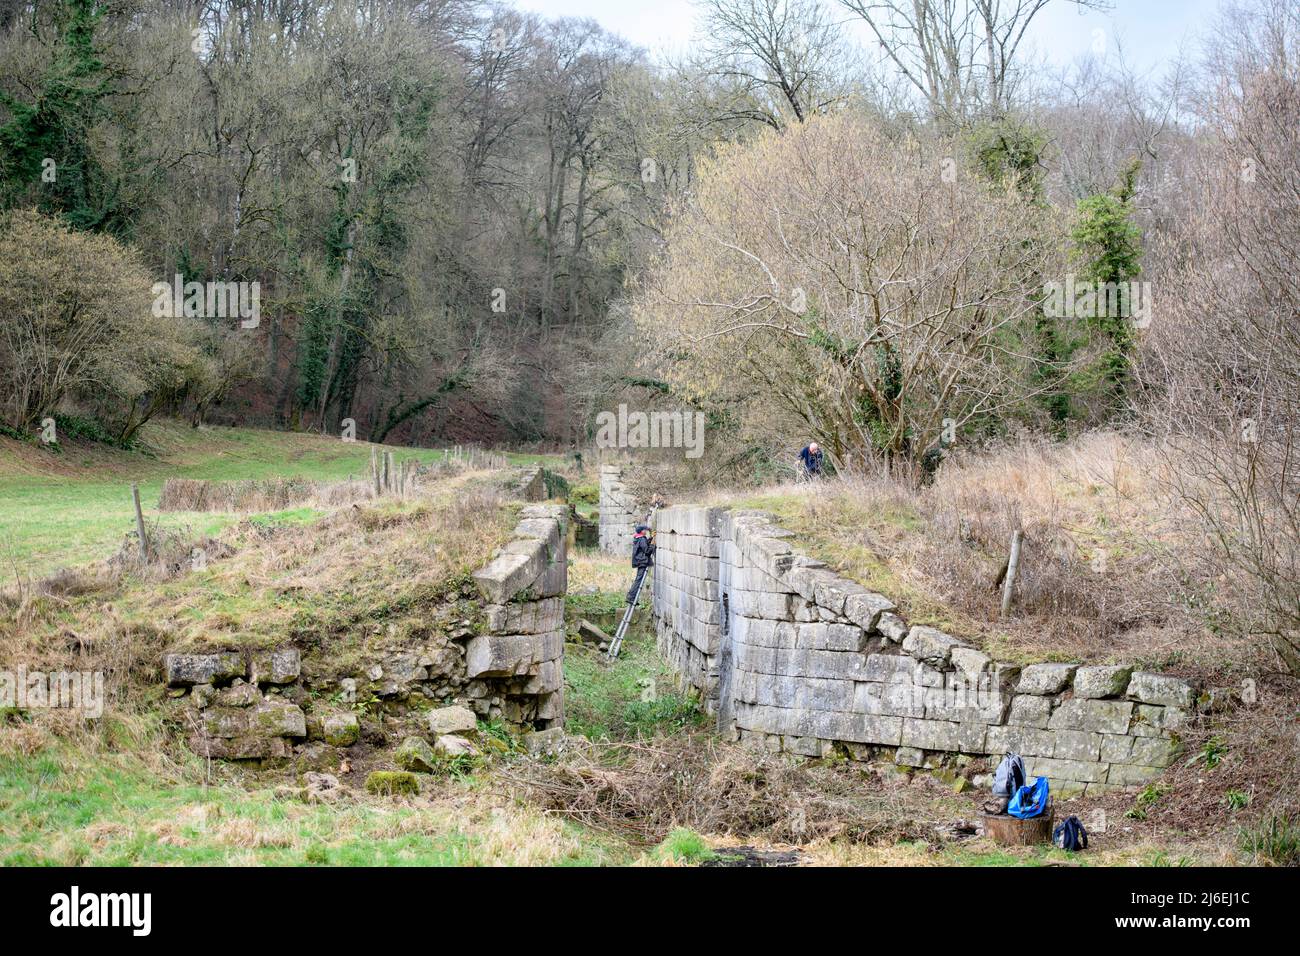 Members of the Somersetshire Coal Canal Society work on restoring the remains of a lock flight near Combe Hay, UK Stock Photo